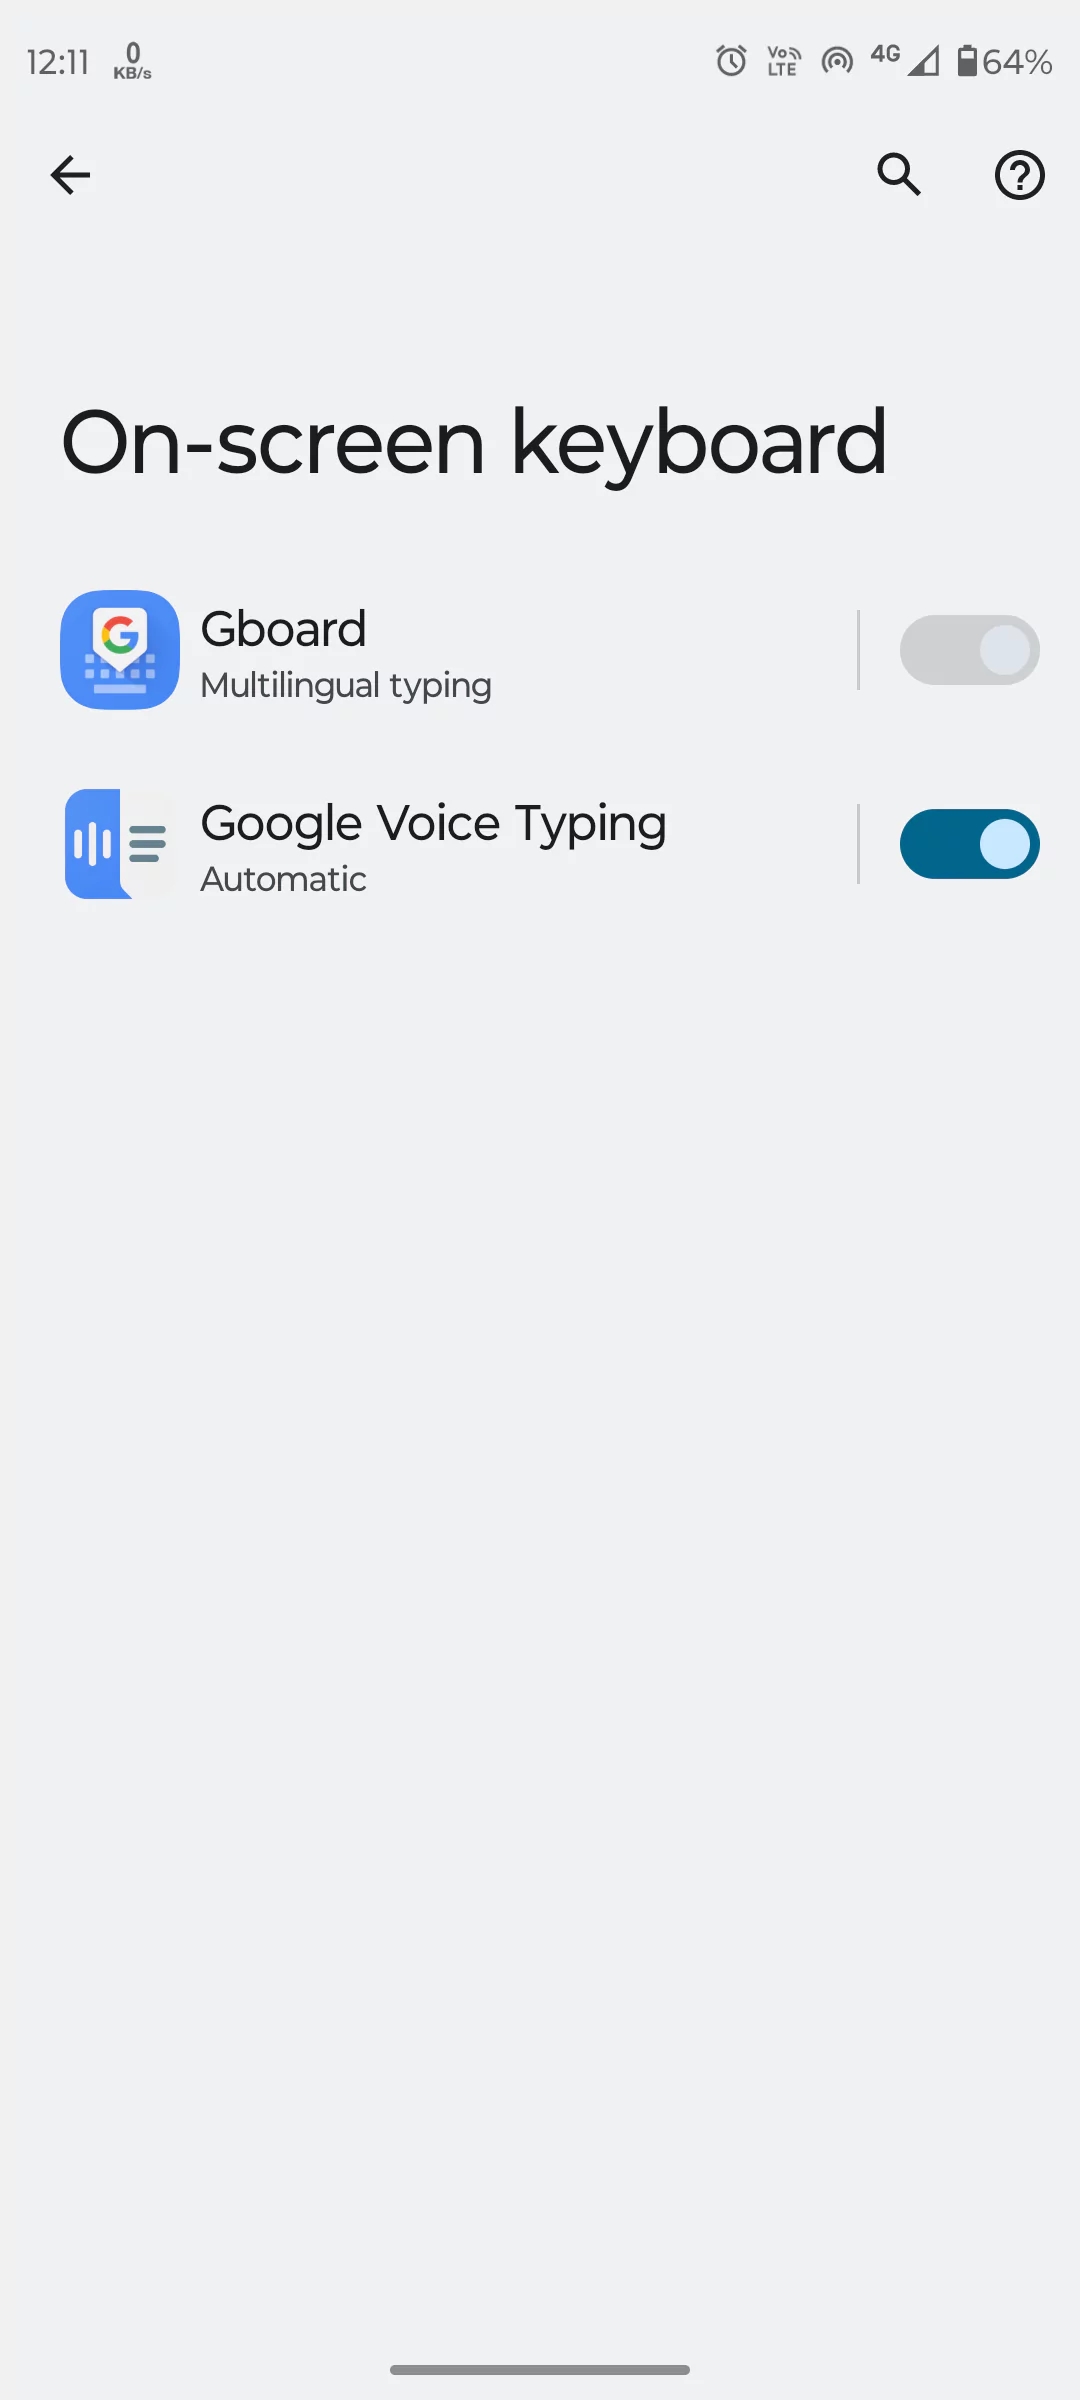 Set Gboard as default keyboard on android